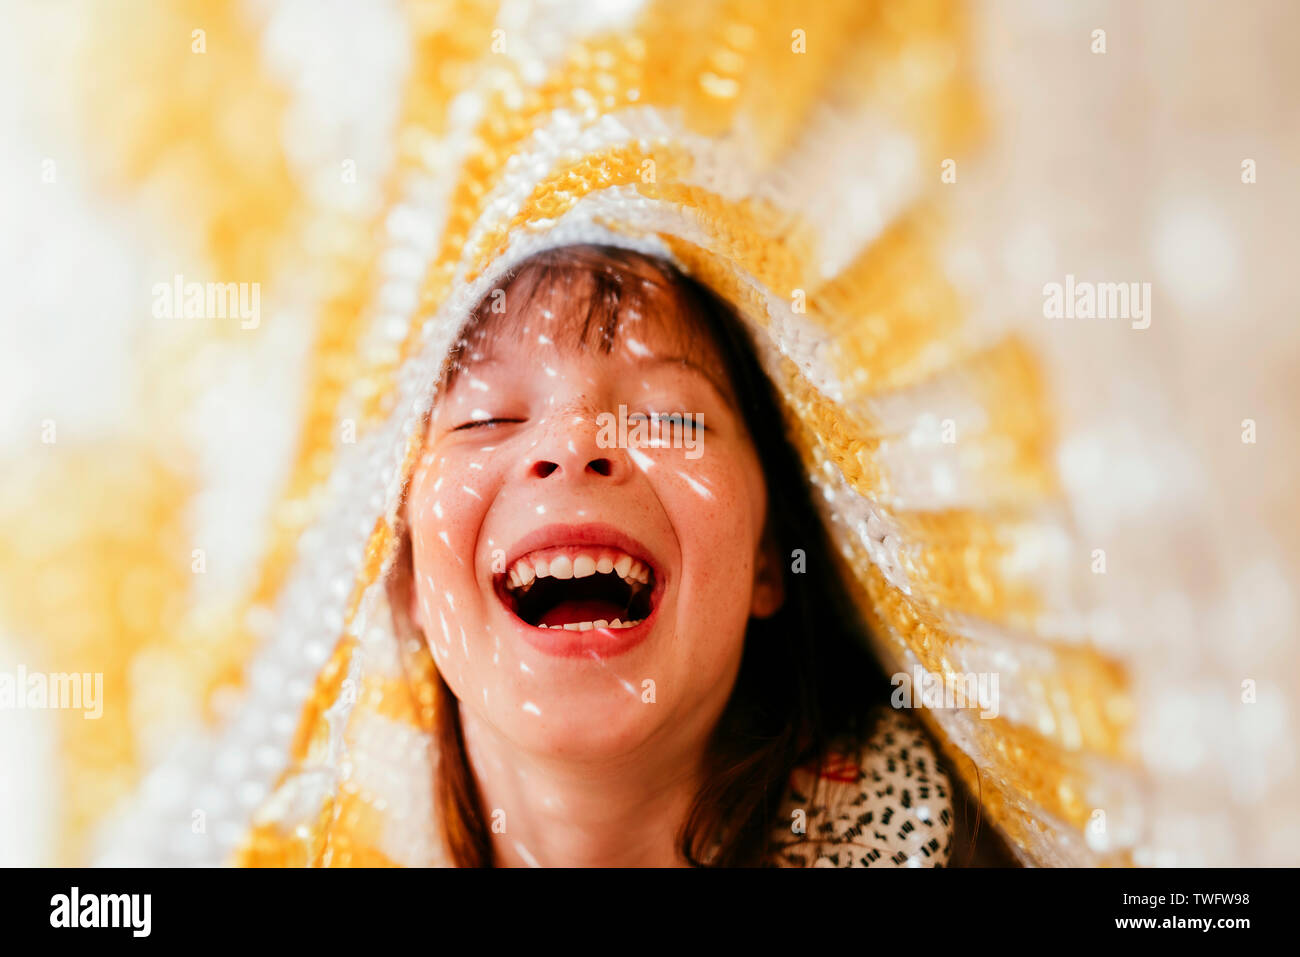 Portrait of a girl hiding under a blanket laughing Stock Photo